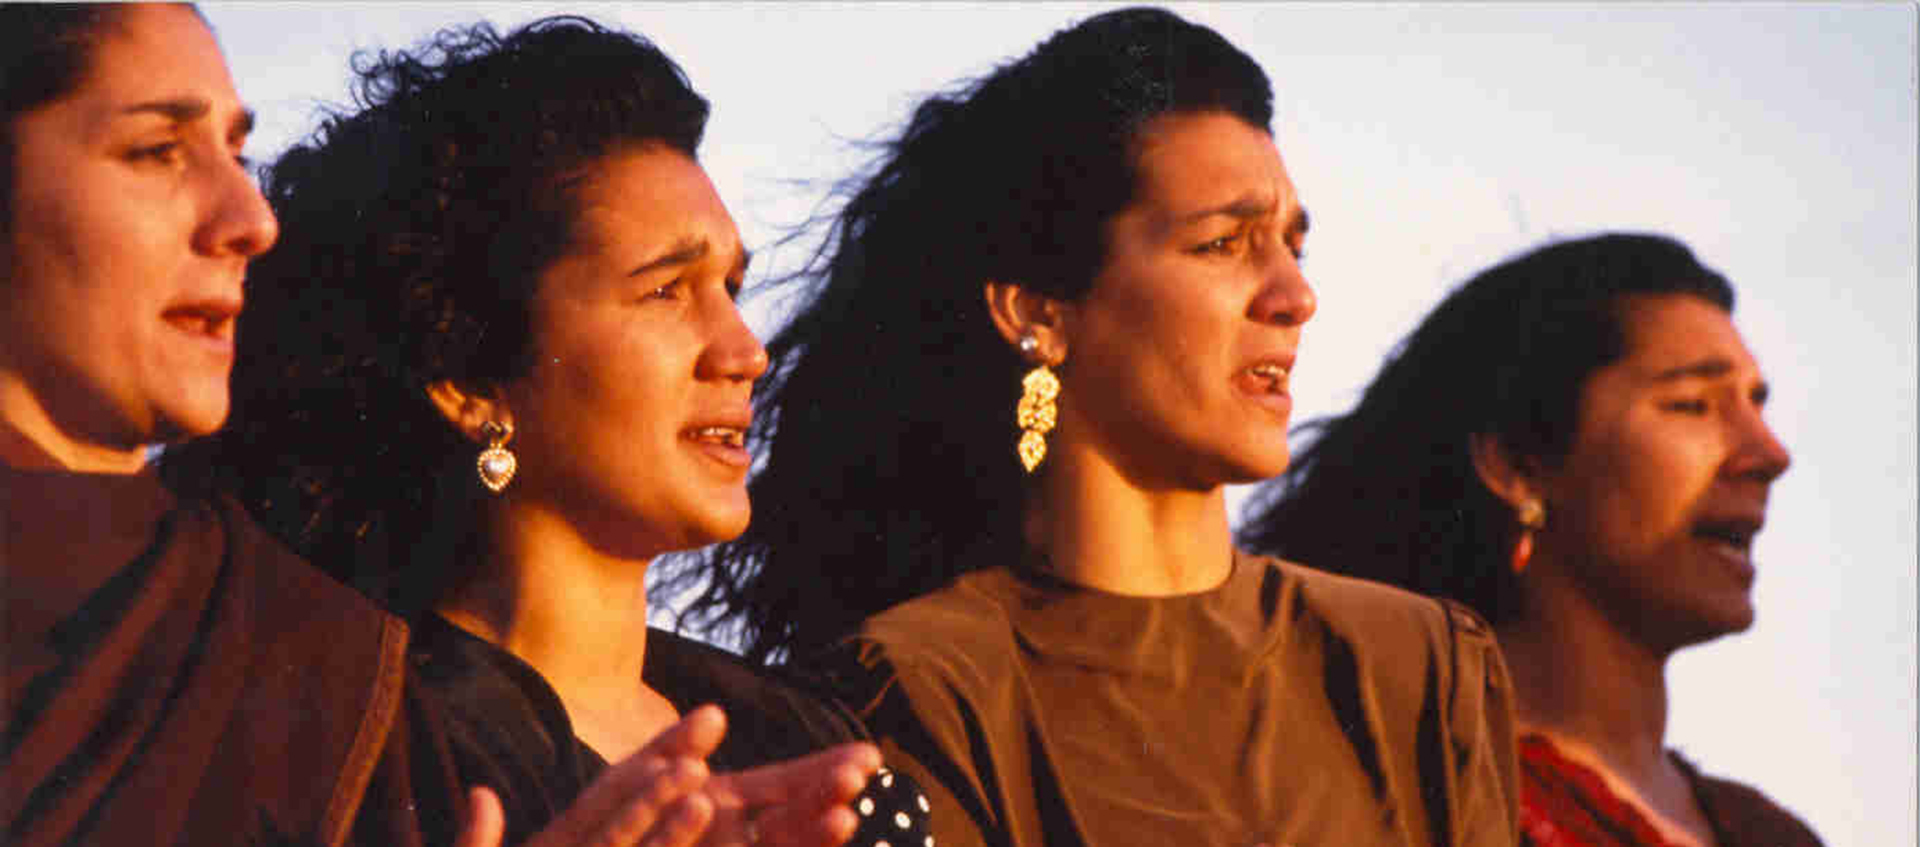 Four women stand together with their hair blowing in the wind. They appear to be singing.